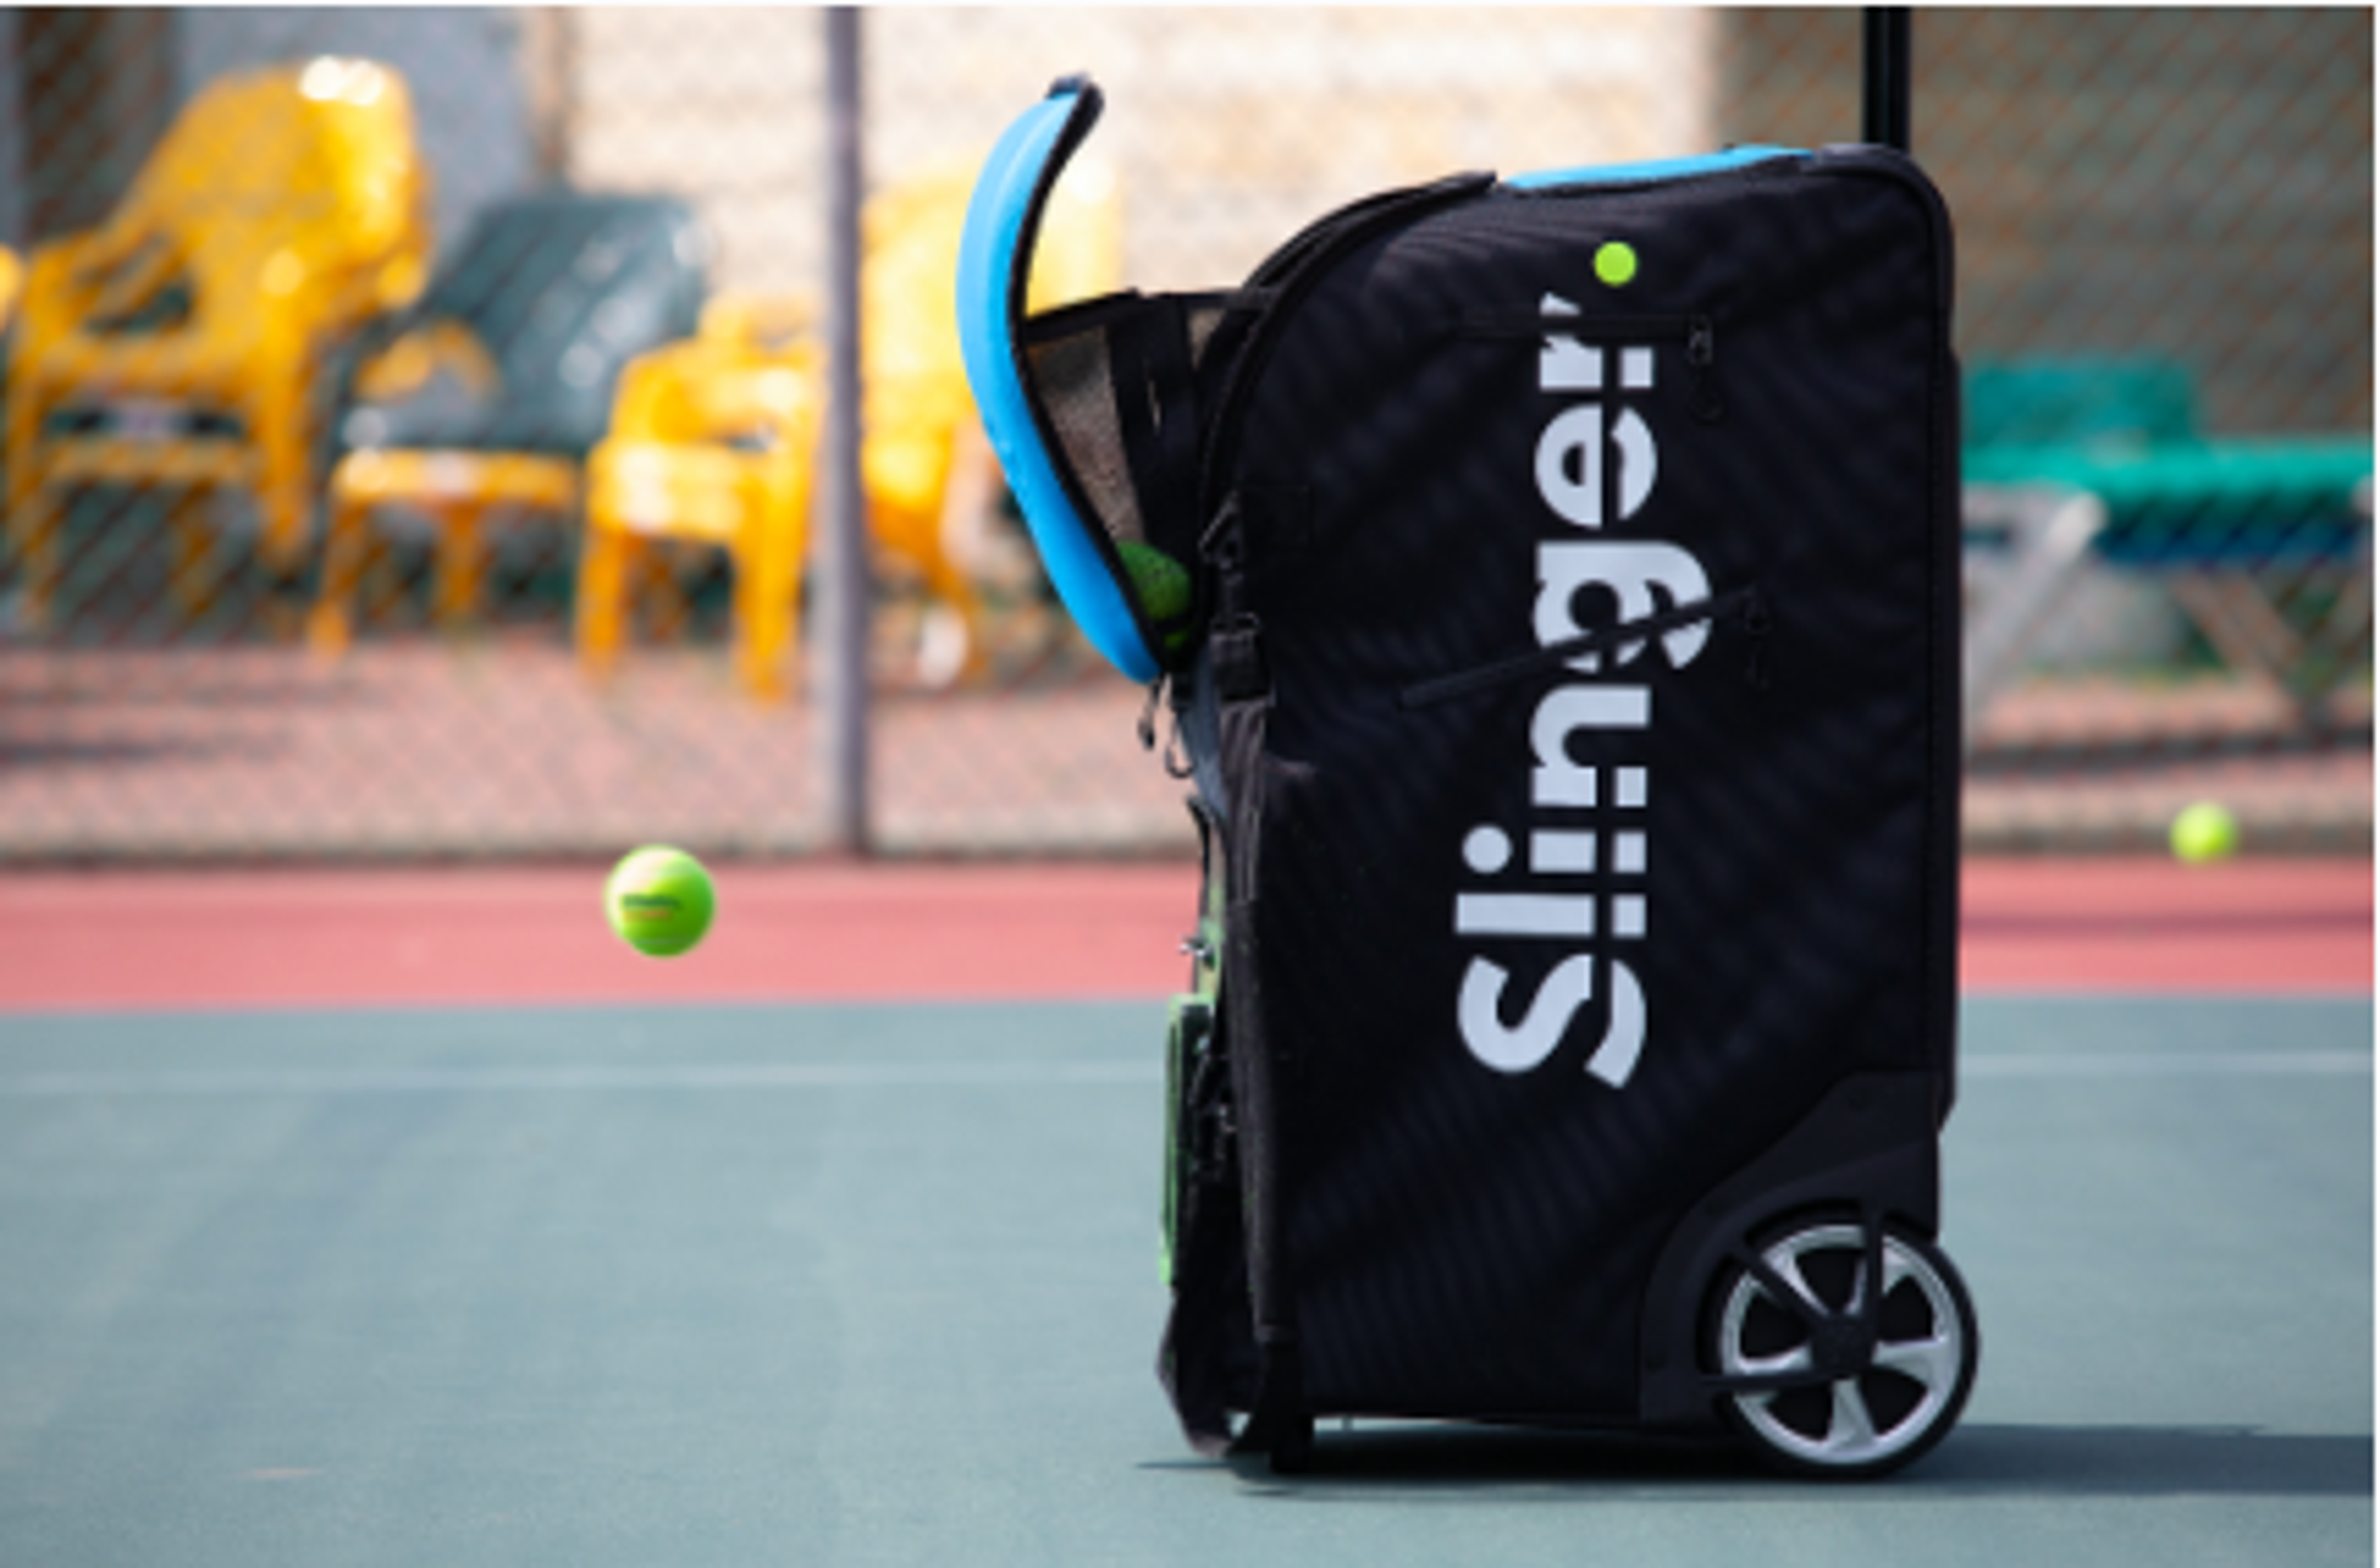 Slinger Bag Has Created A Product That Allows Tennis Players To Practice Anytime, Anywhere